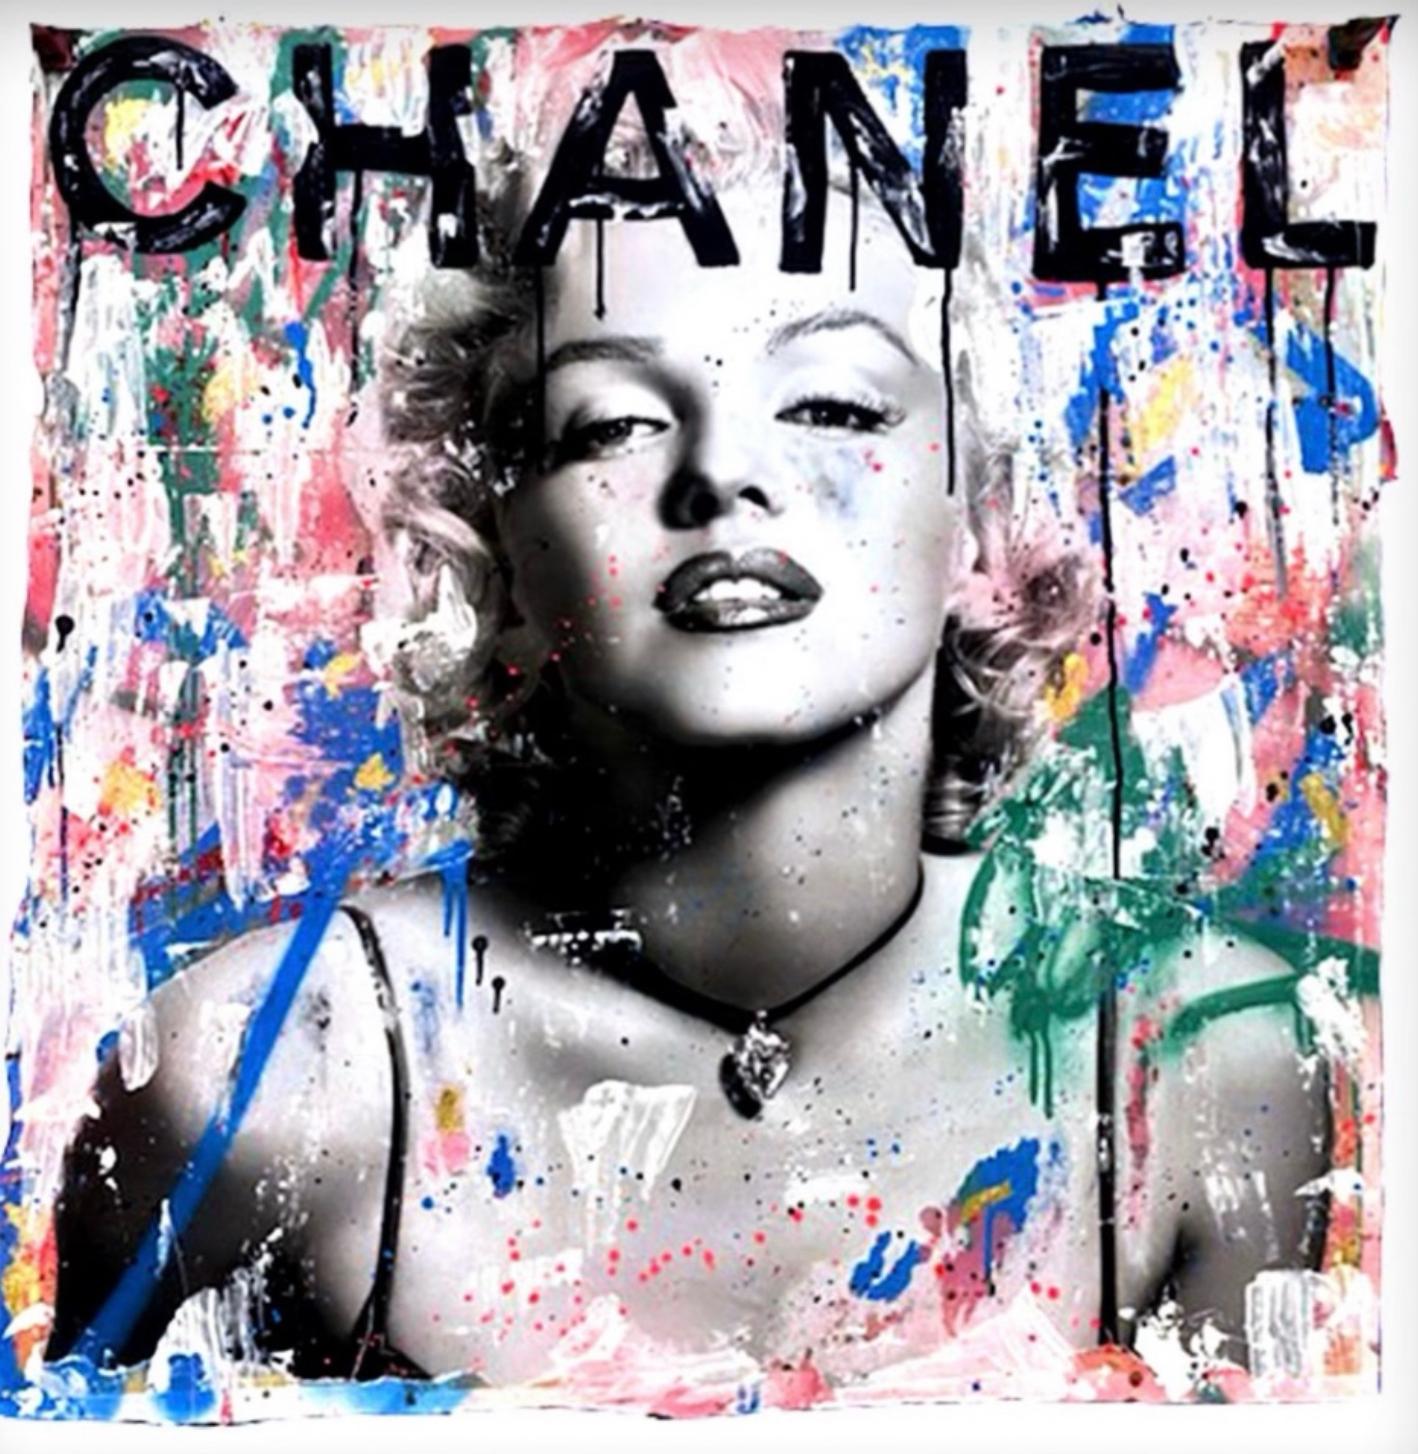 Monroe X Chanel - Mixed Media on Paper - Framed - Mixed Media Art by Seek One